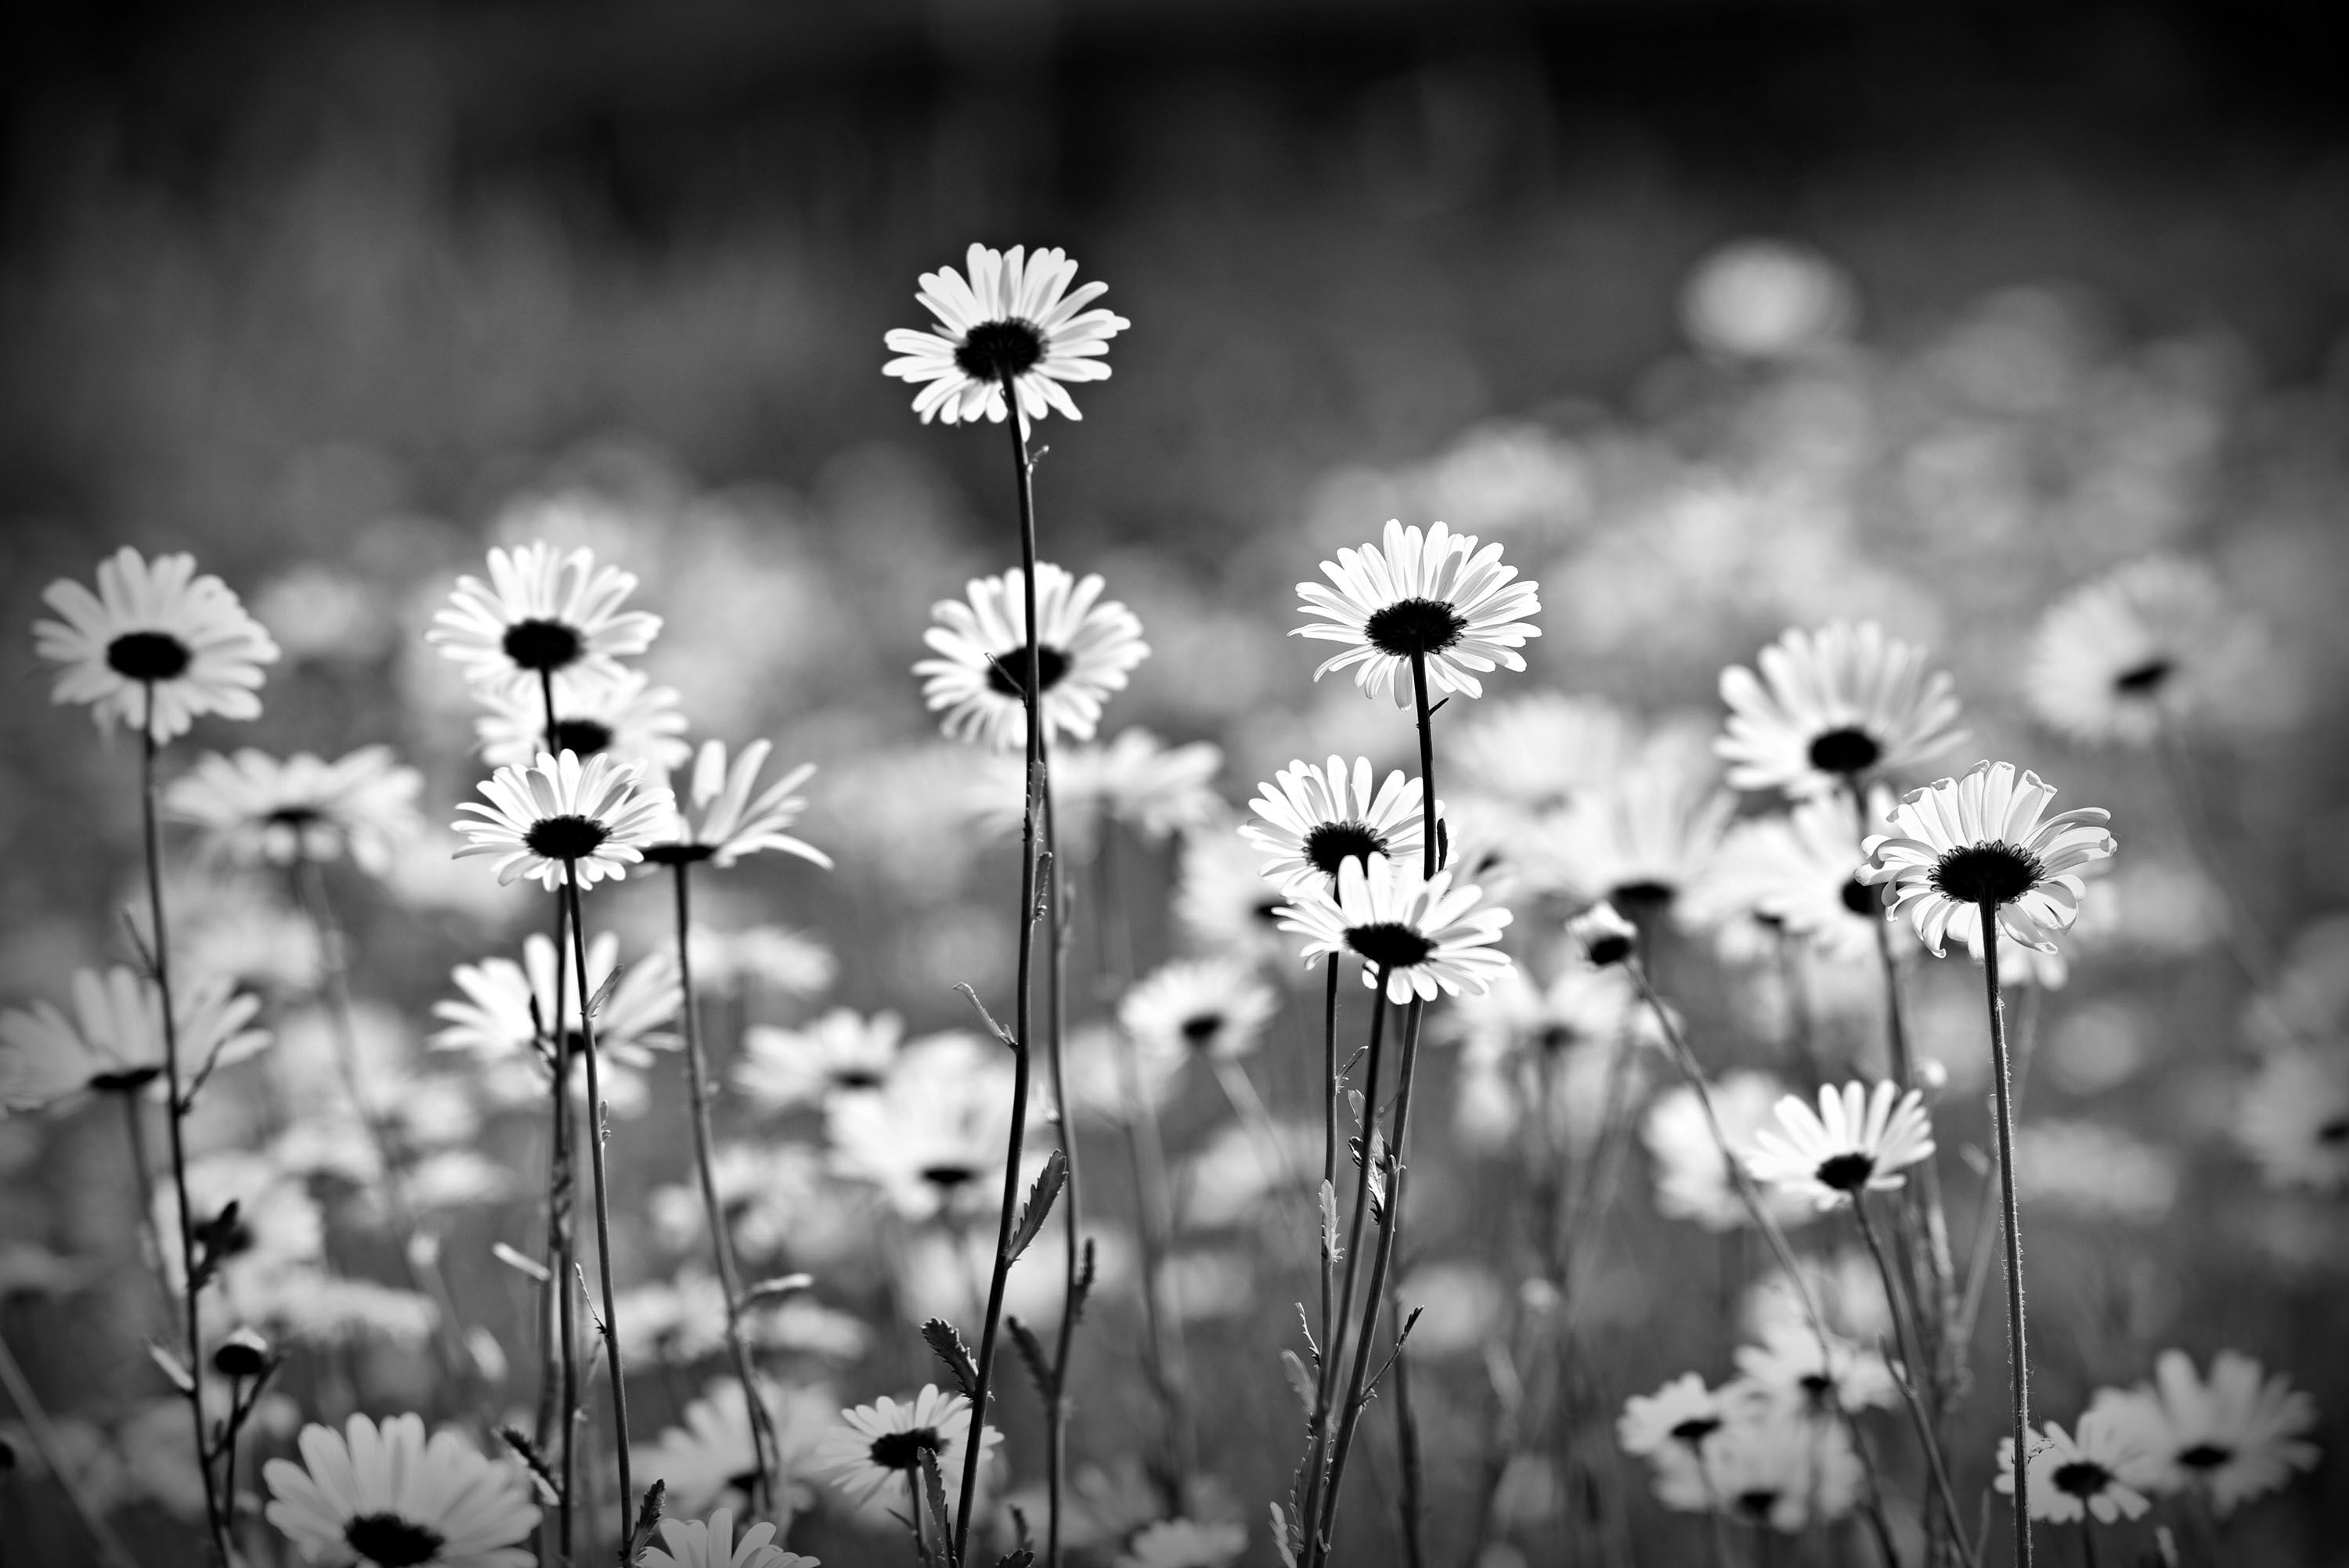 A black and white photo of a field of daisies. - Daisy